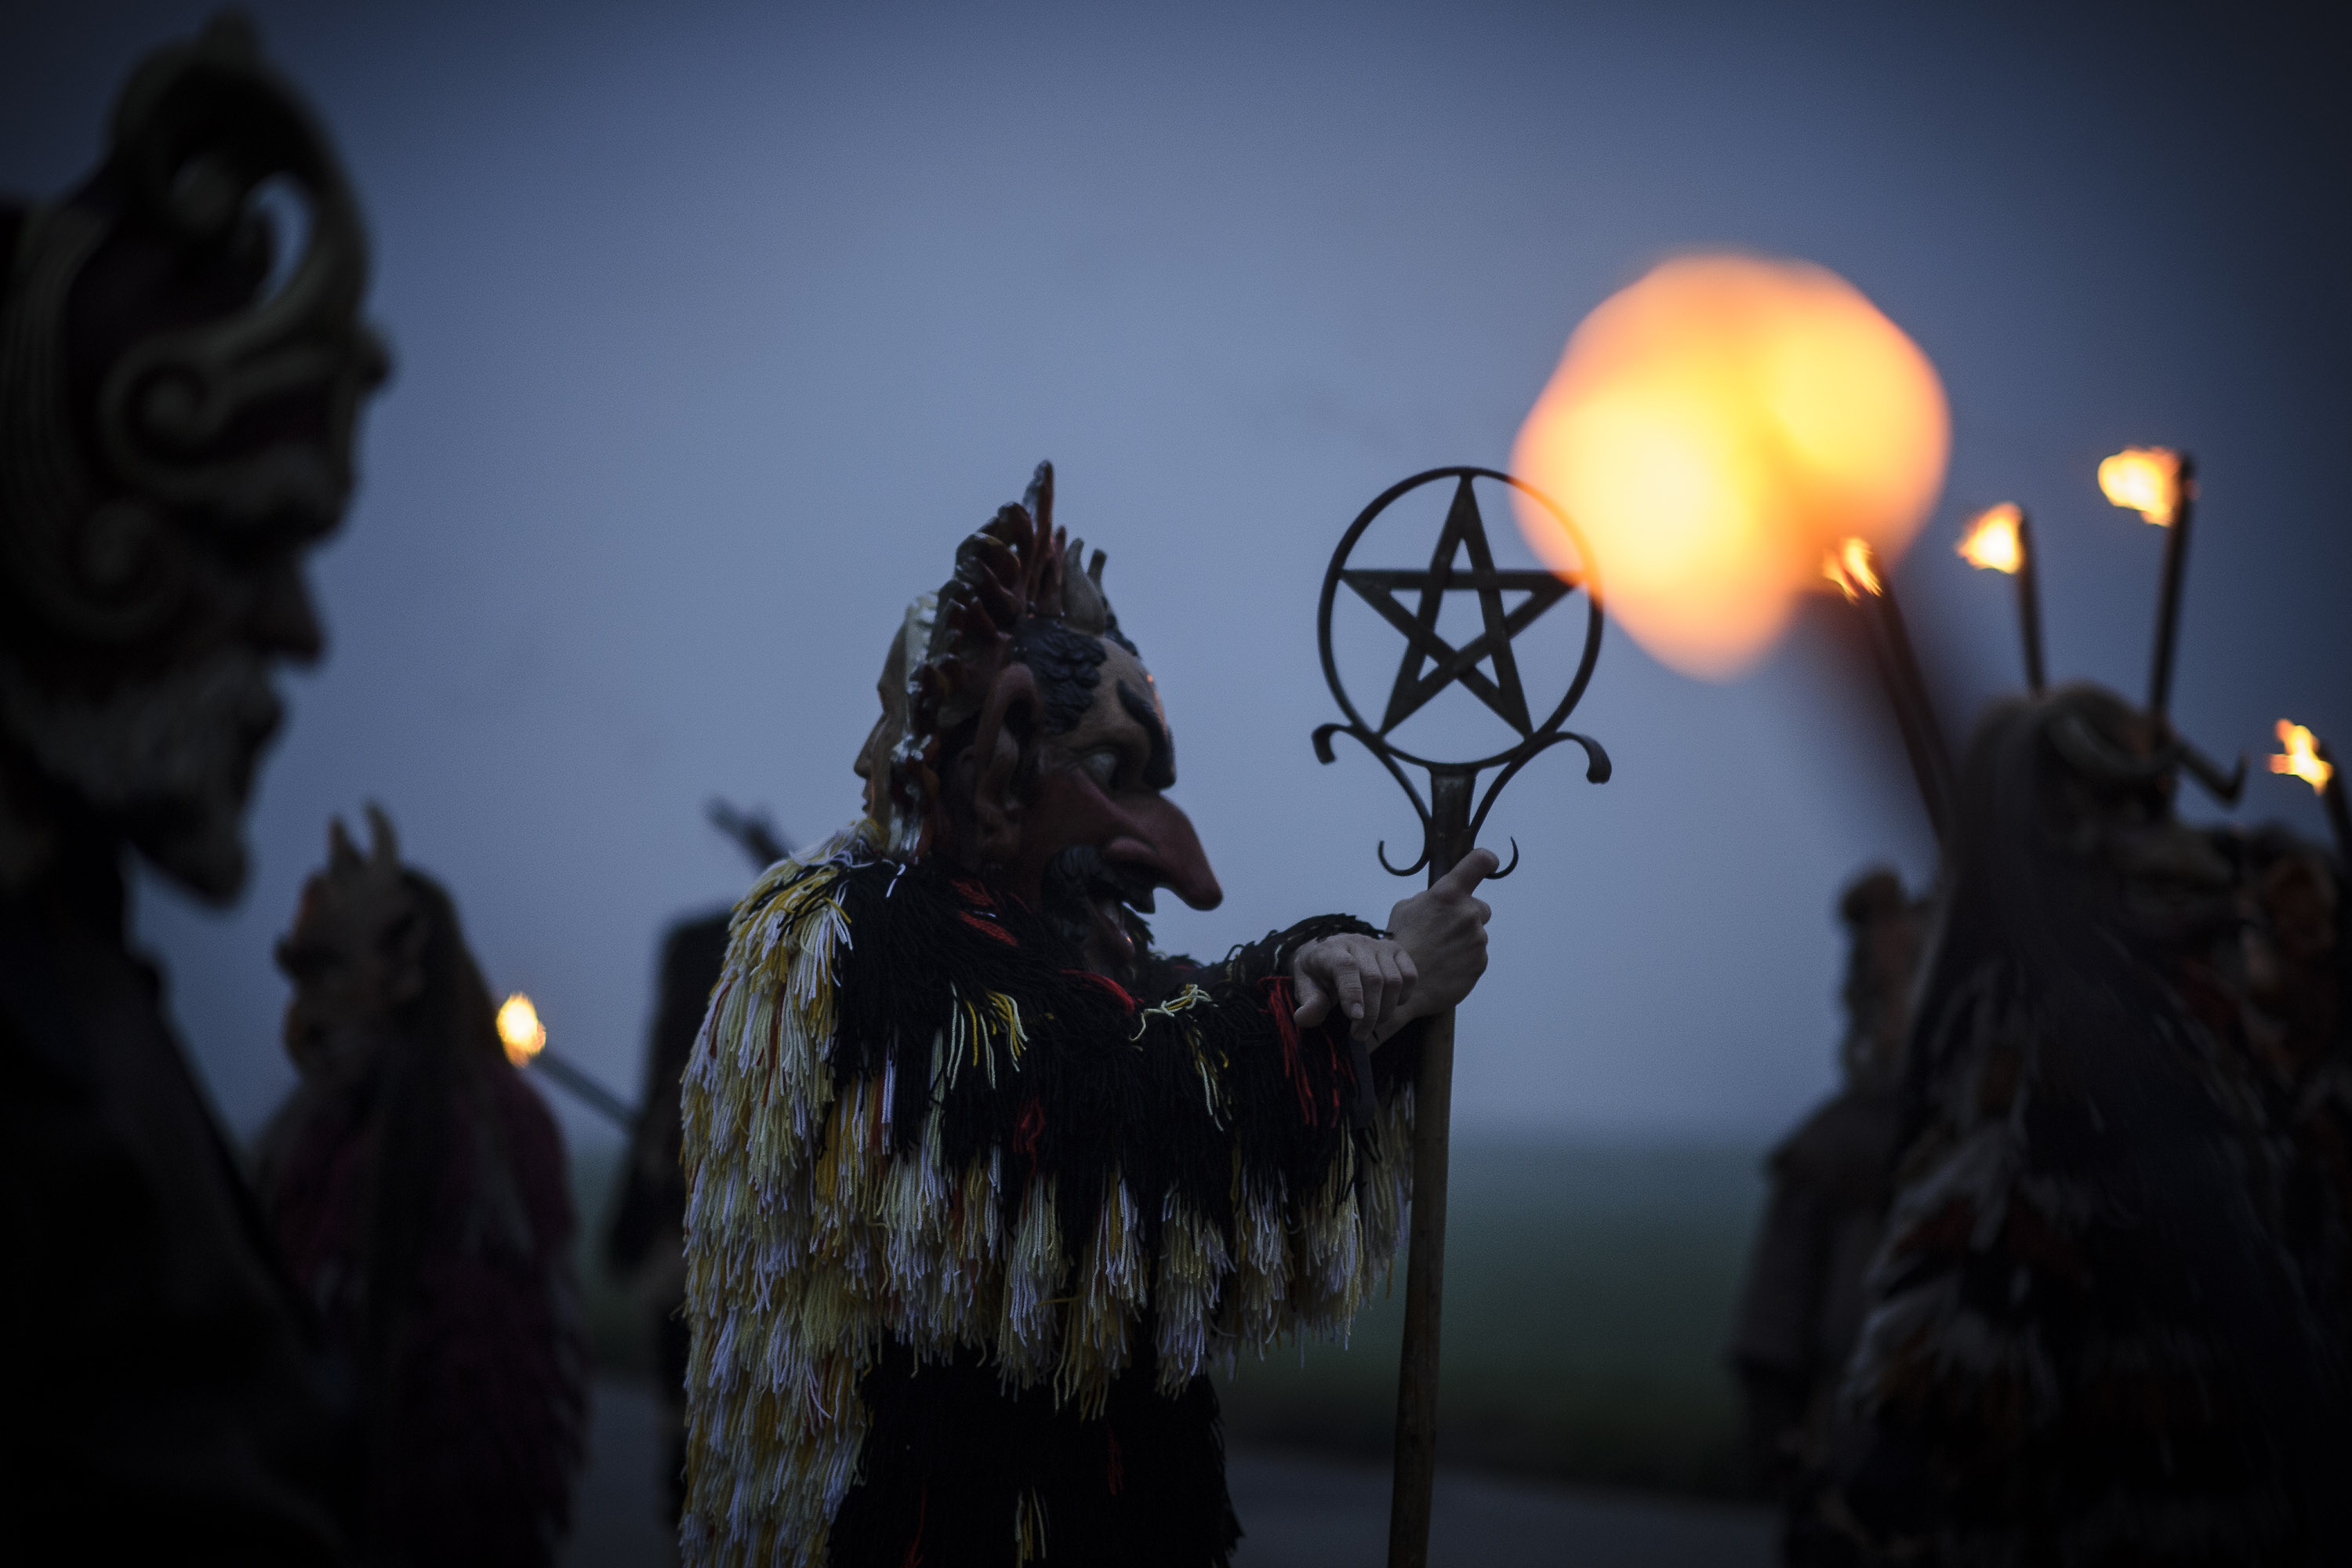 Participants dressed as Perchten roam village streets to chase away evil winter spirits in the annual Perchten gathering in Bavaria on November 29, 2014 near Kirchseeon, Germany. Perchten are the mythical entourage of Perchta, a goddess in ancient southern German alpine pagan tradition, and are usually fearsome creatures with tusks and horns and covered in hair. The tradition dates back at least to the 16th century and is also related to traditions of Krampus, Teifel, Klausen and La Befana, all animal-like creatures in the German, Austrian, Italian and Swiss alpine regions whose duties include instilling fear into naughty children. (Photo by Philipp Guelland/Getty Images)